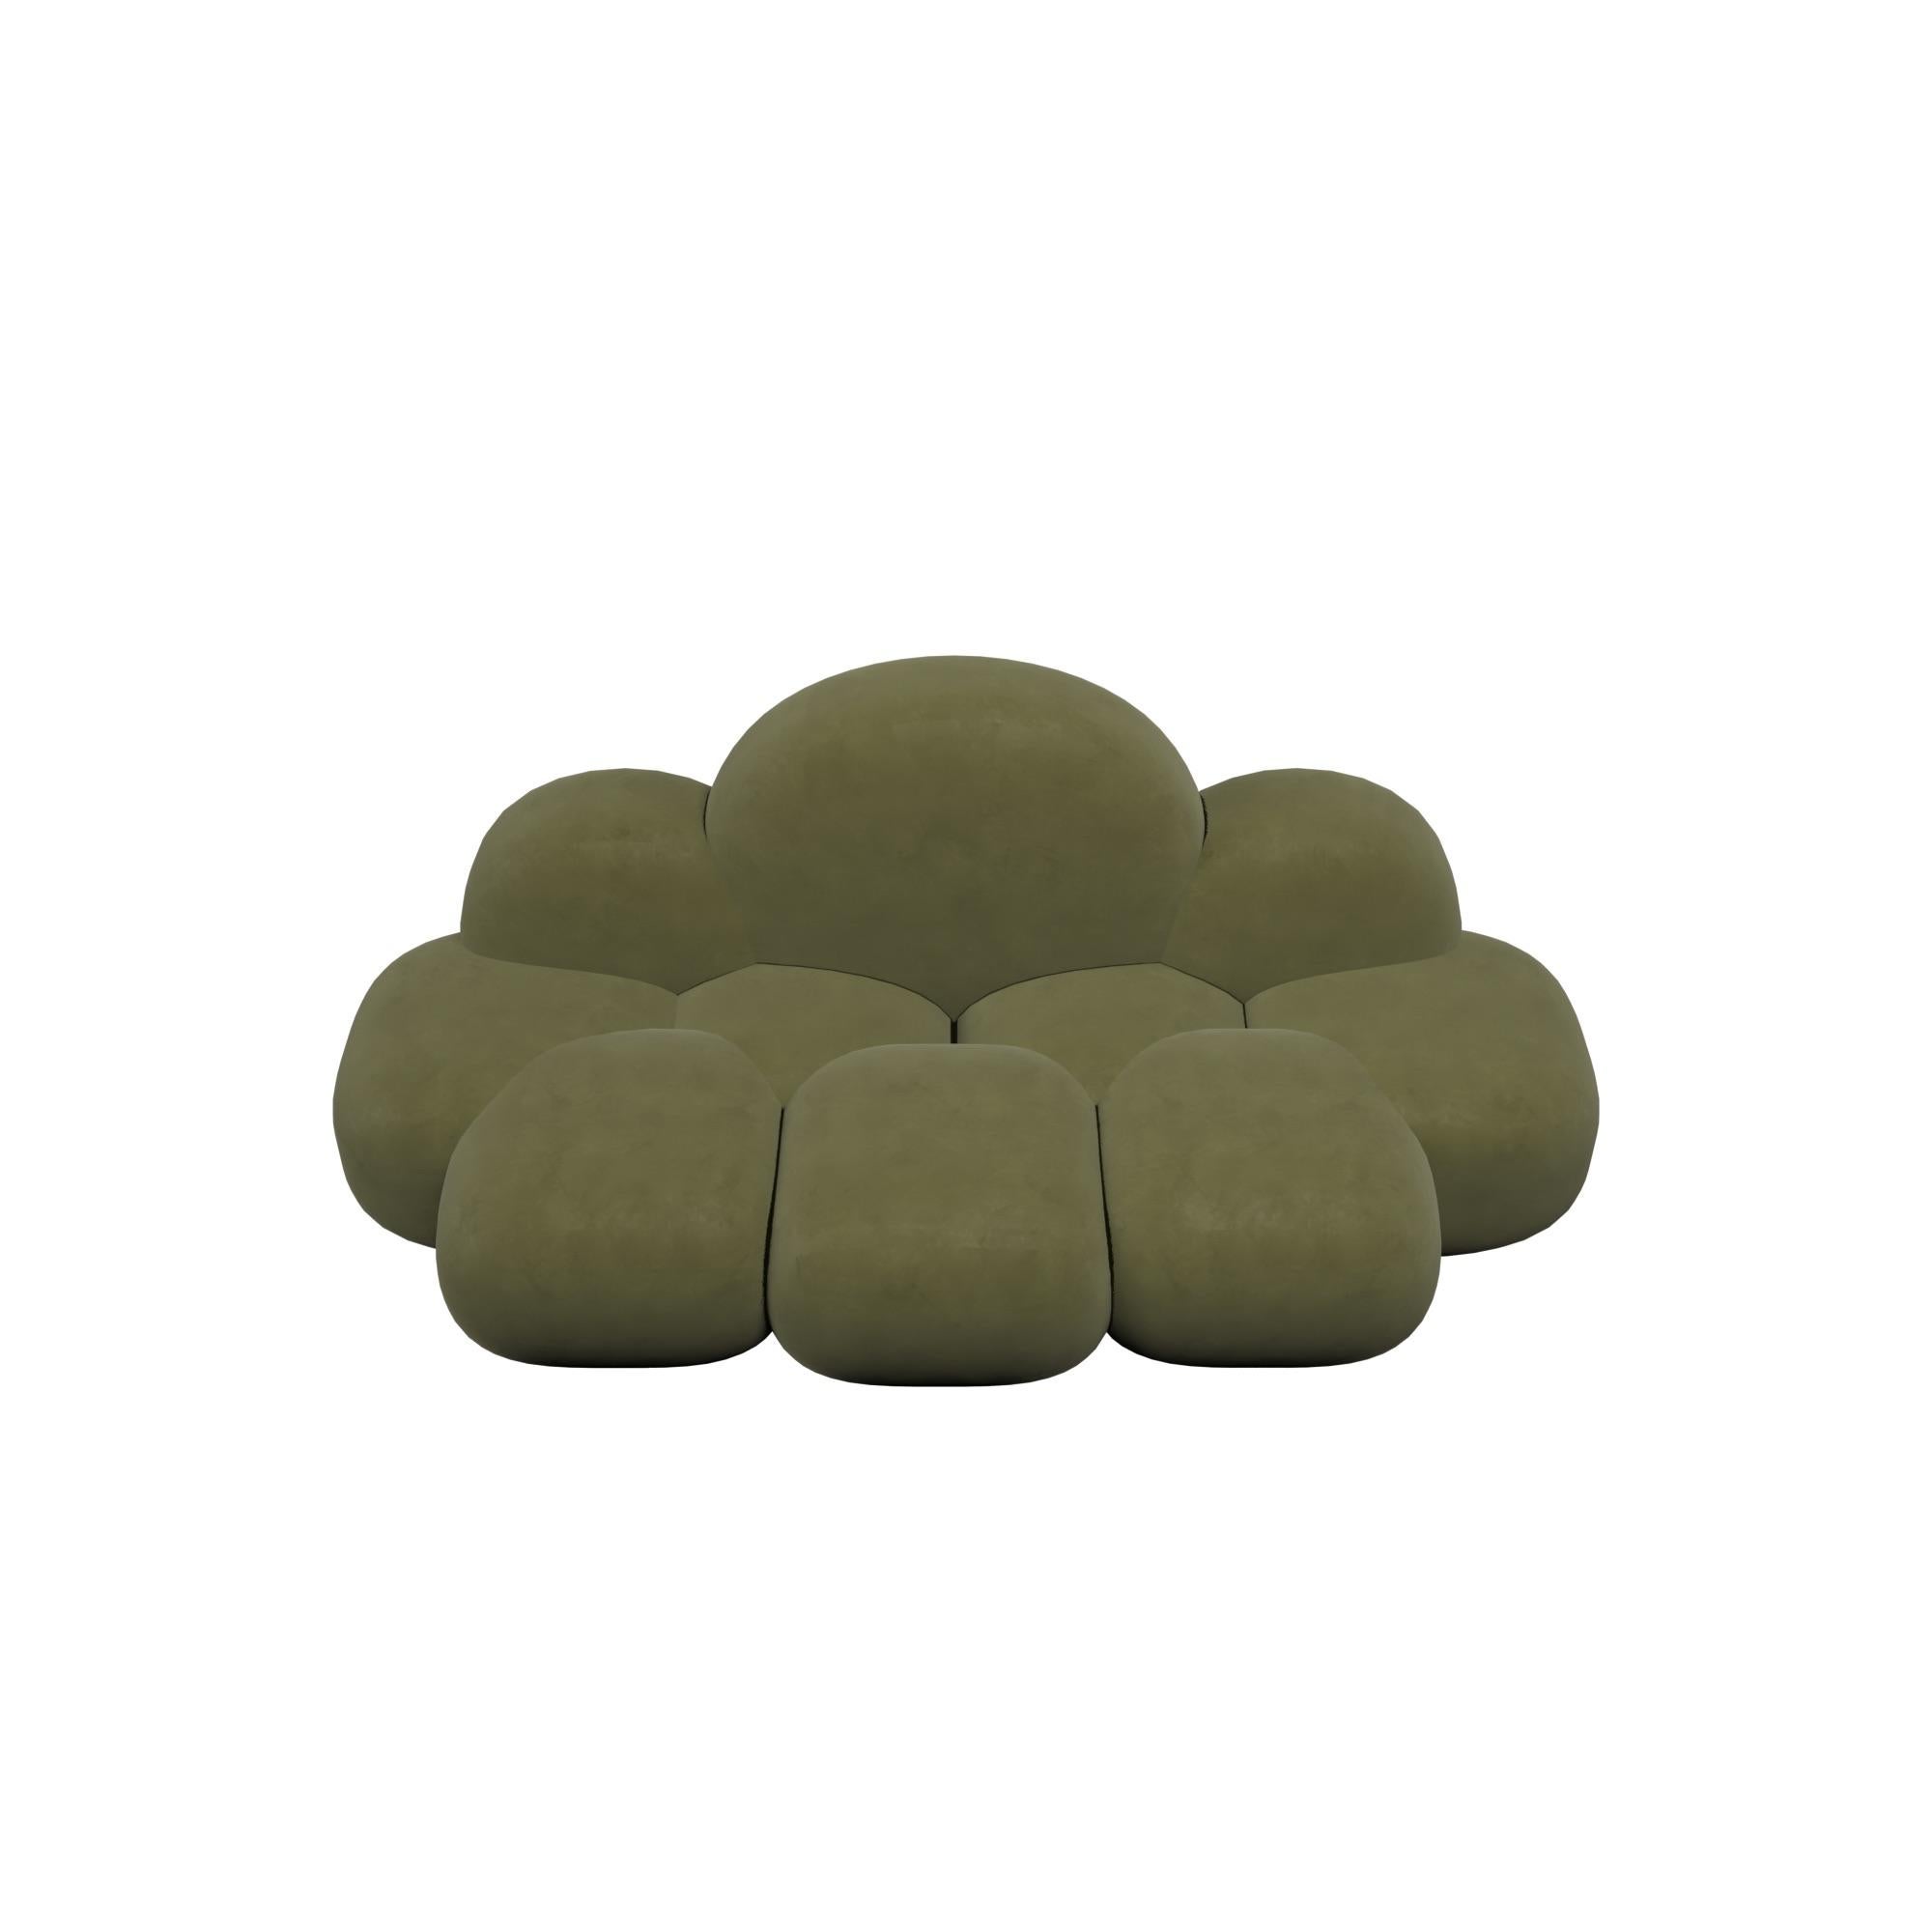 Modern LOS ANGELES Sofa in Olive by Alexandre Ligios, REP by Tuleste Factory For Sale